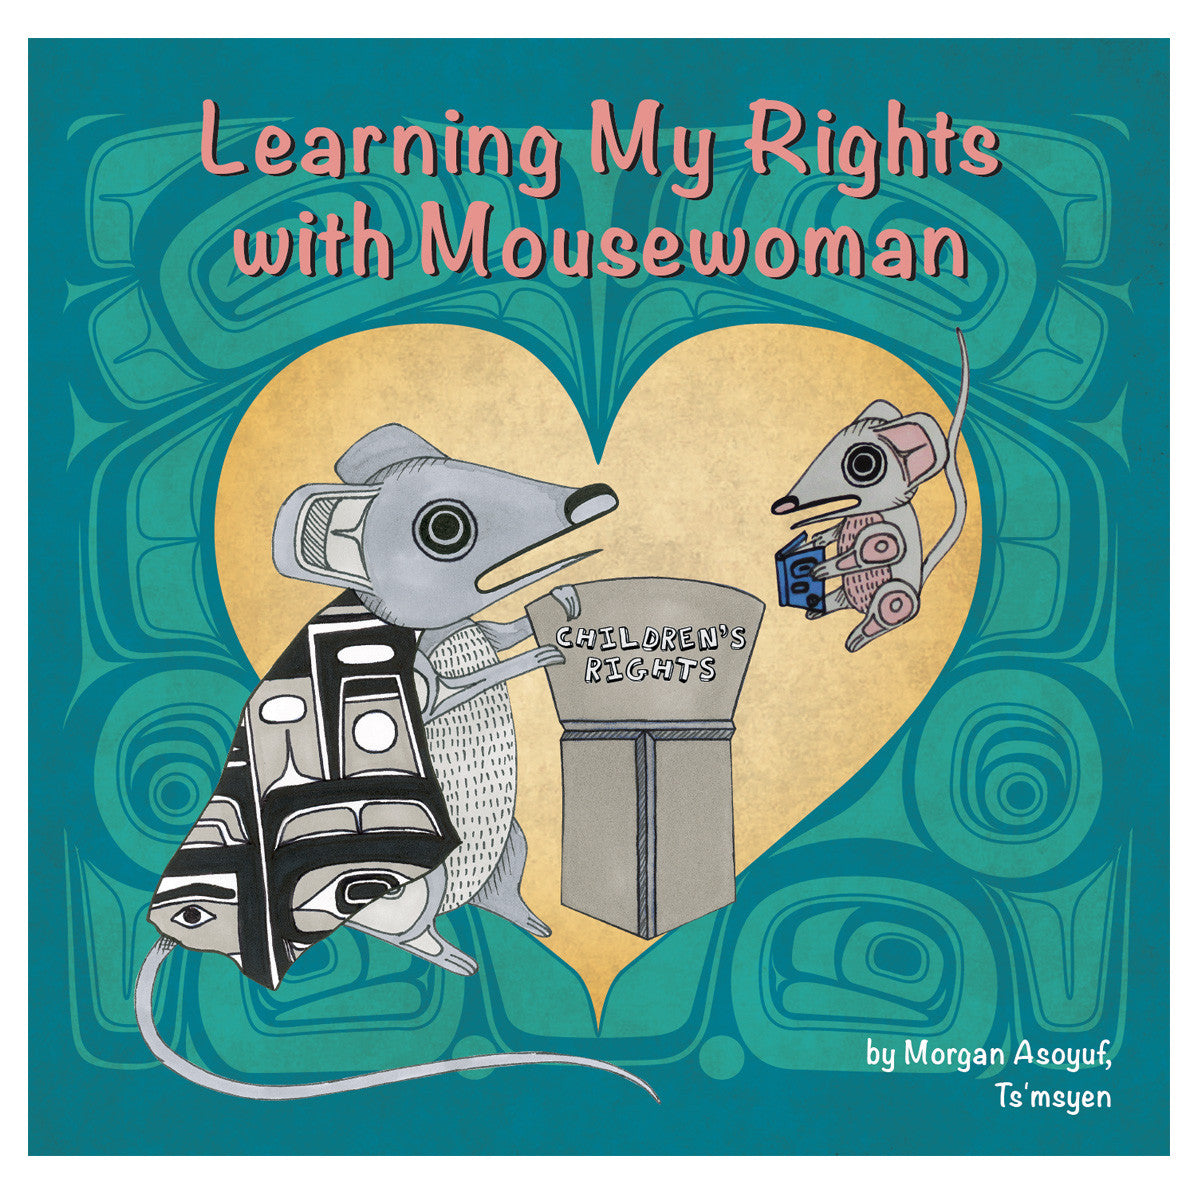 Board Book | Learning My Rights with Mousewoman by Morgan Asoyuf